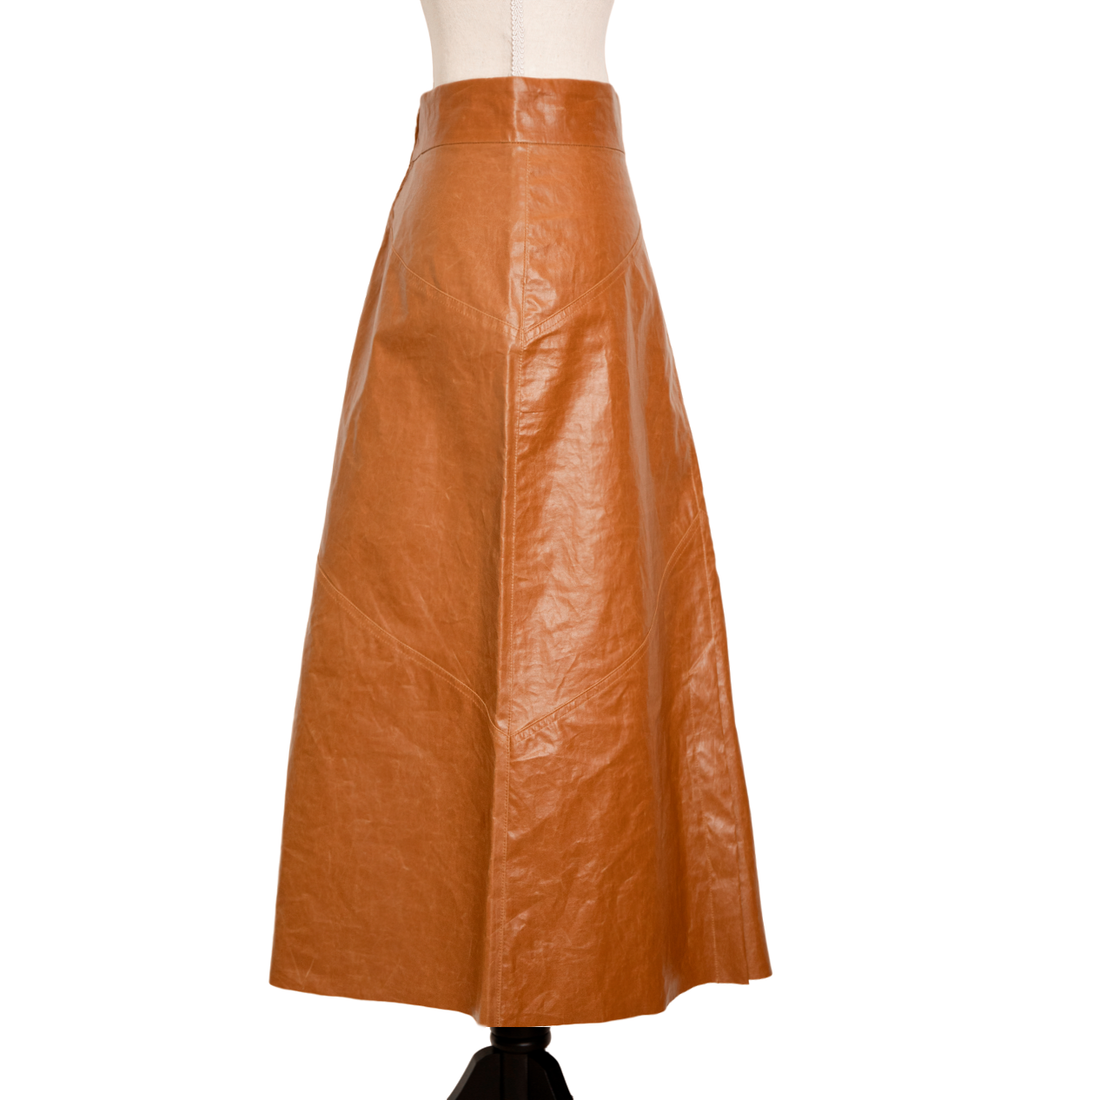 Isabel Marant midi skirt in a leather look